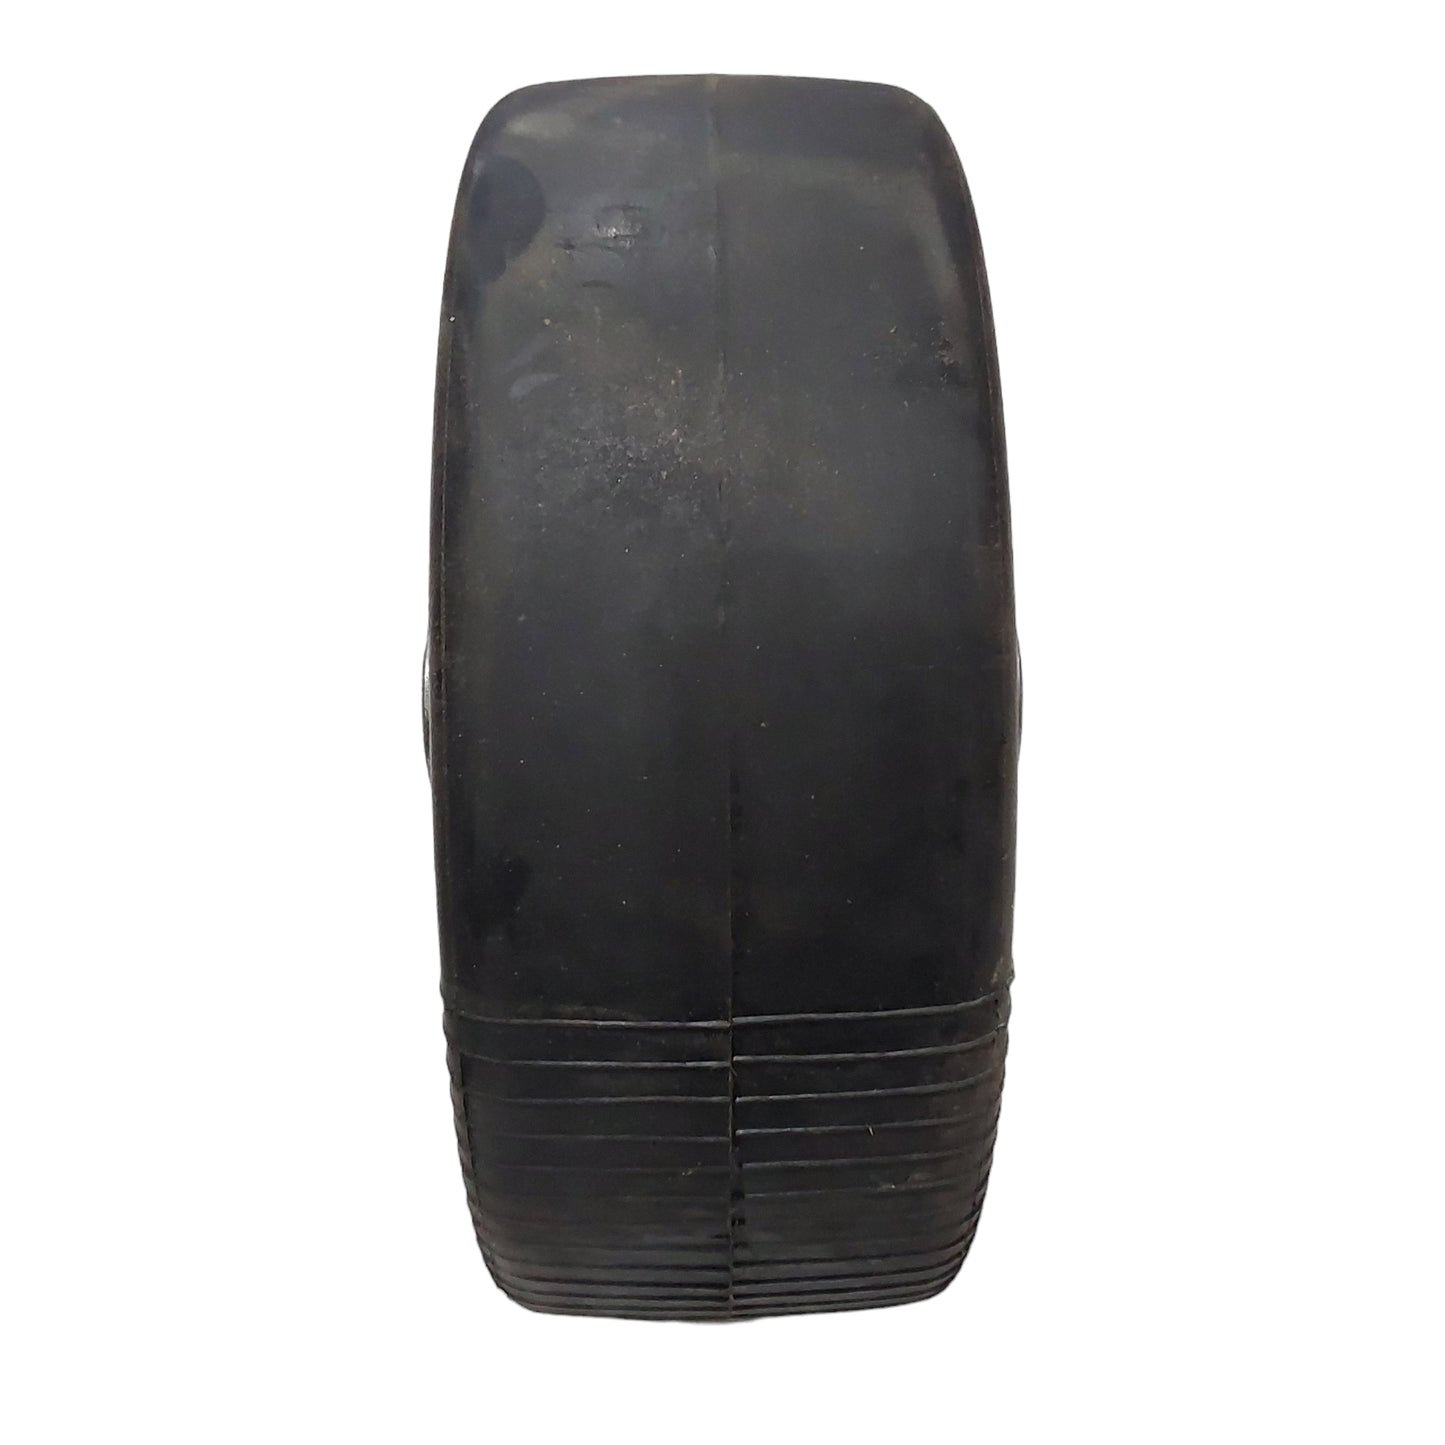 Proven Part 2 Pack 9X3.50X4 White Scratched Up Paint No Flat Lawn Mower Tire For 1-513648, 103-1224, 103-2171, 51364 Bearing Kit 1-513809, 1-513810, 1-513547